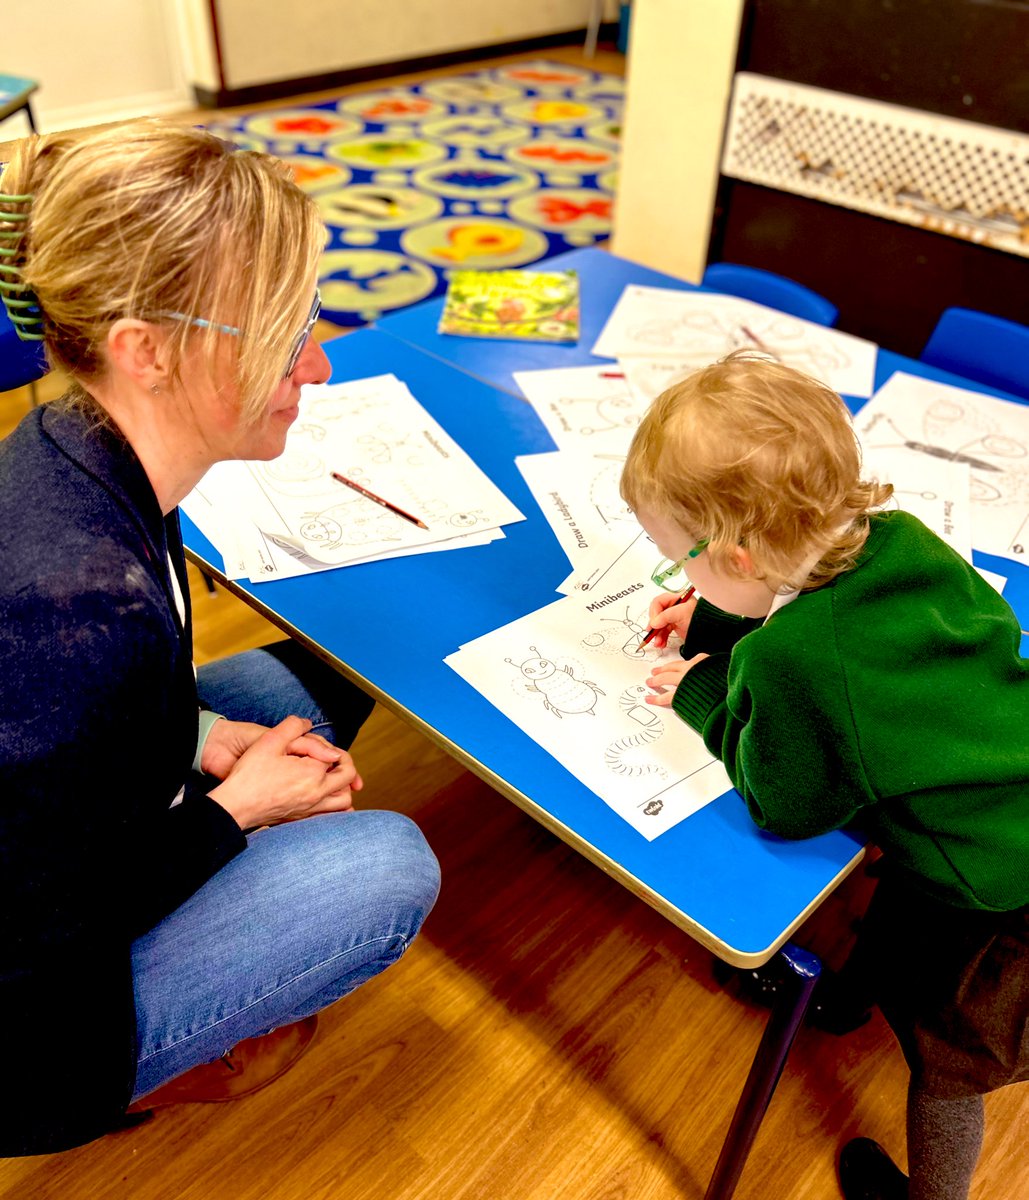 We welcomed our families in for Nursery “stay and play” this morning. The children had lots of fun in provision showing their adults exactly what to do! Future dates are on our school blog bawtrymayflower.school/blog/weekly-bl… #stayandplay